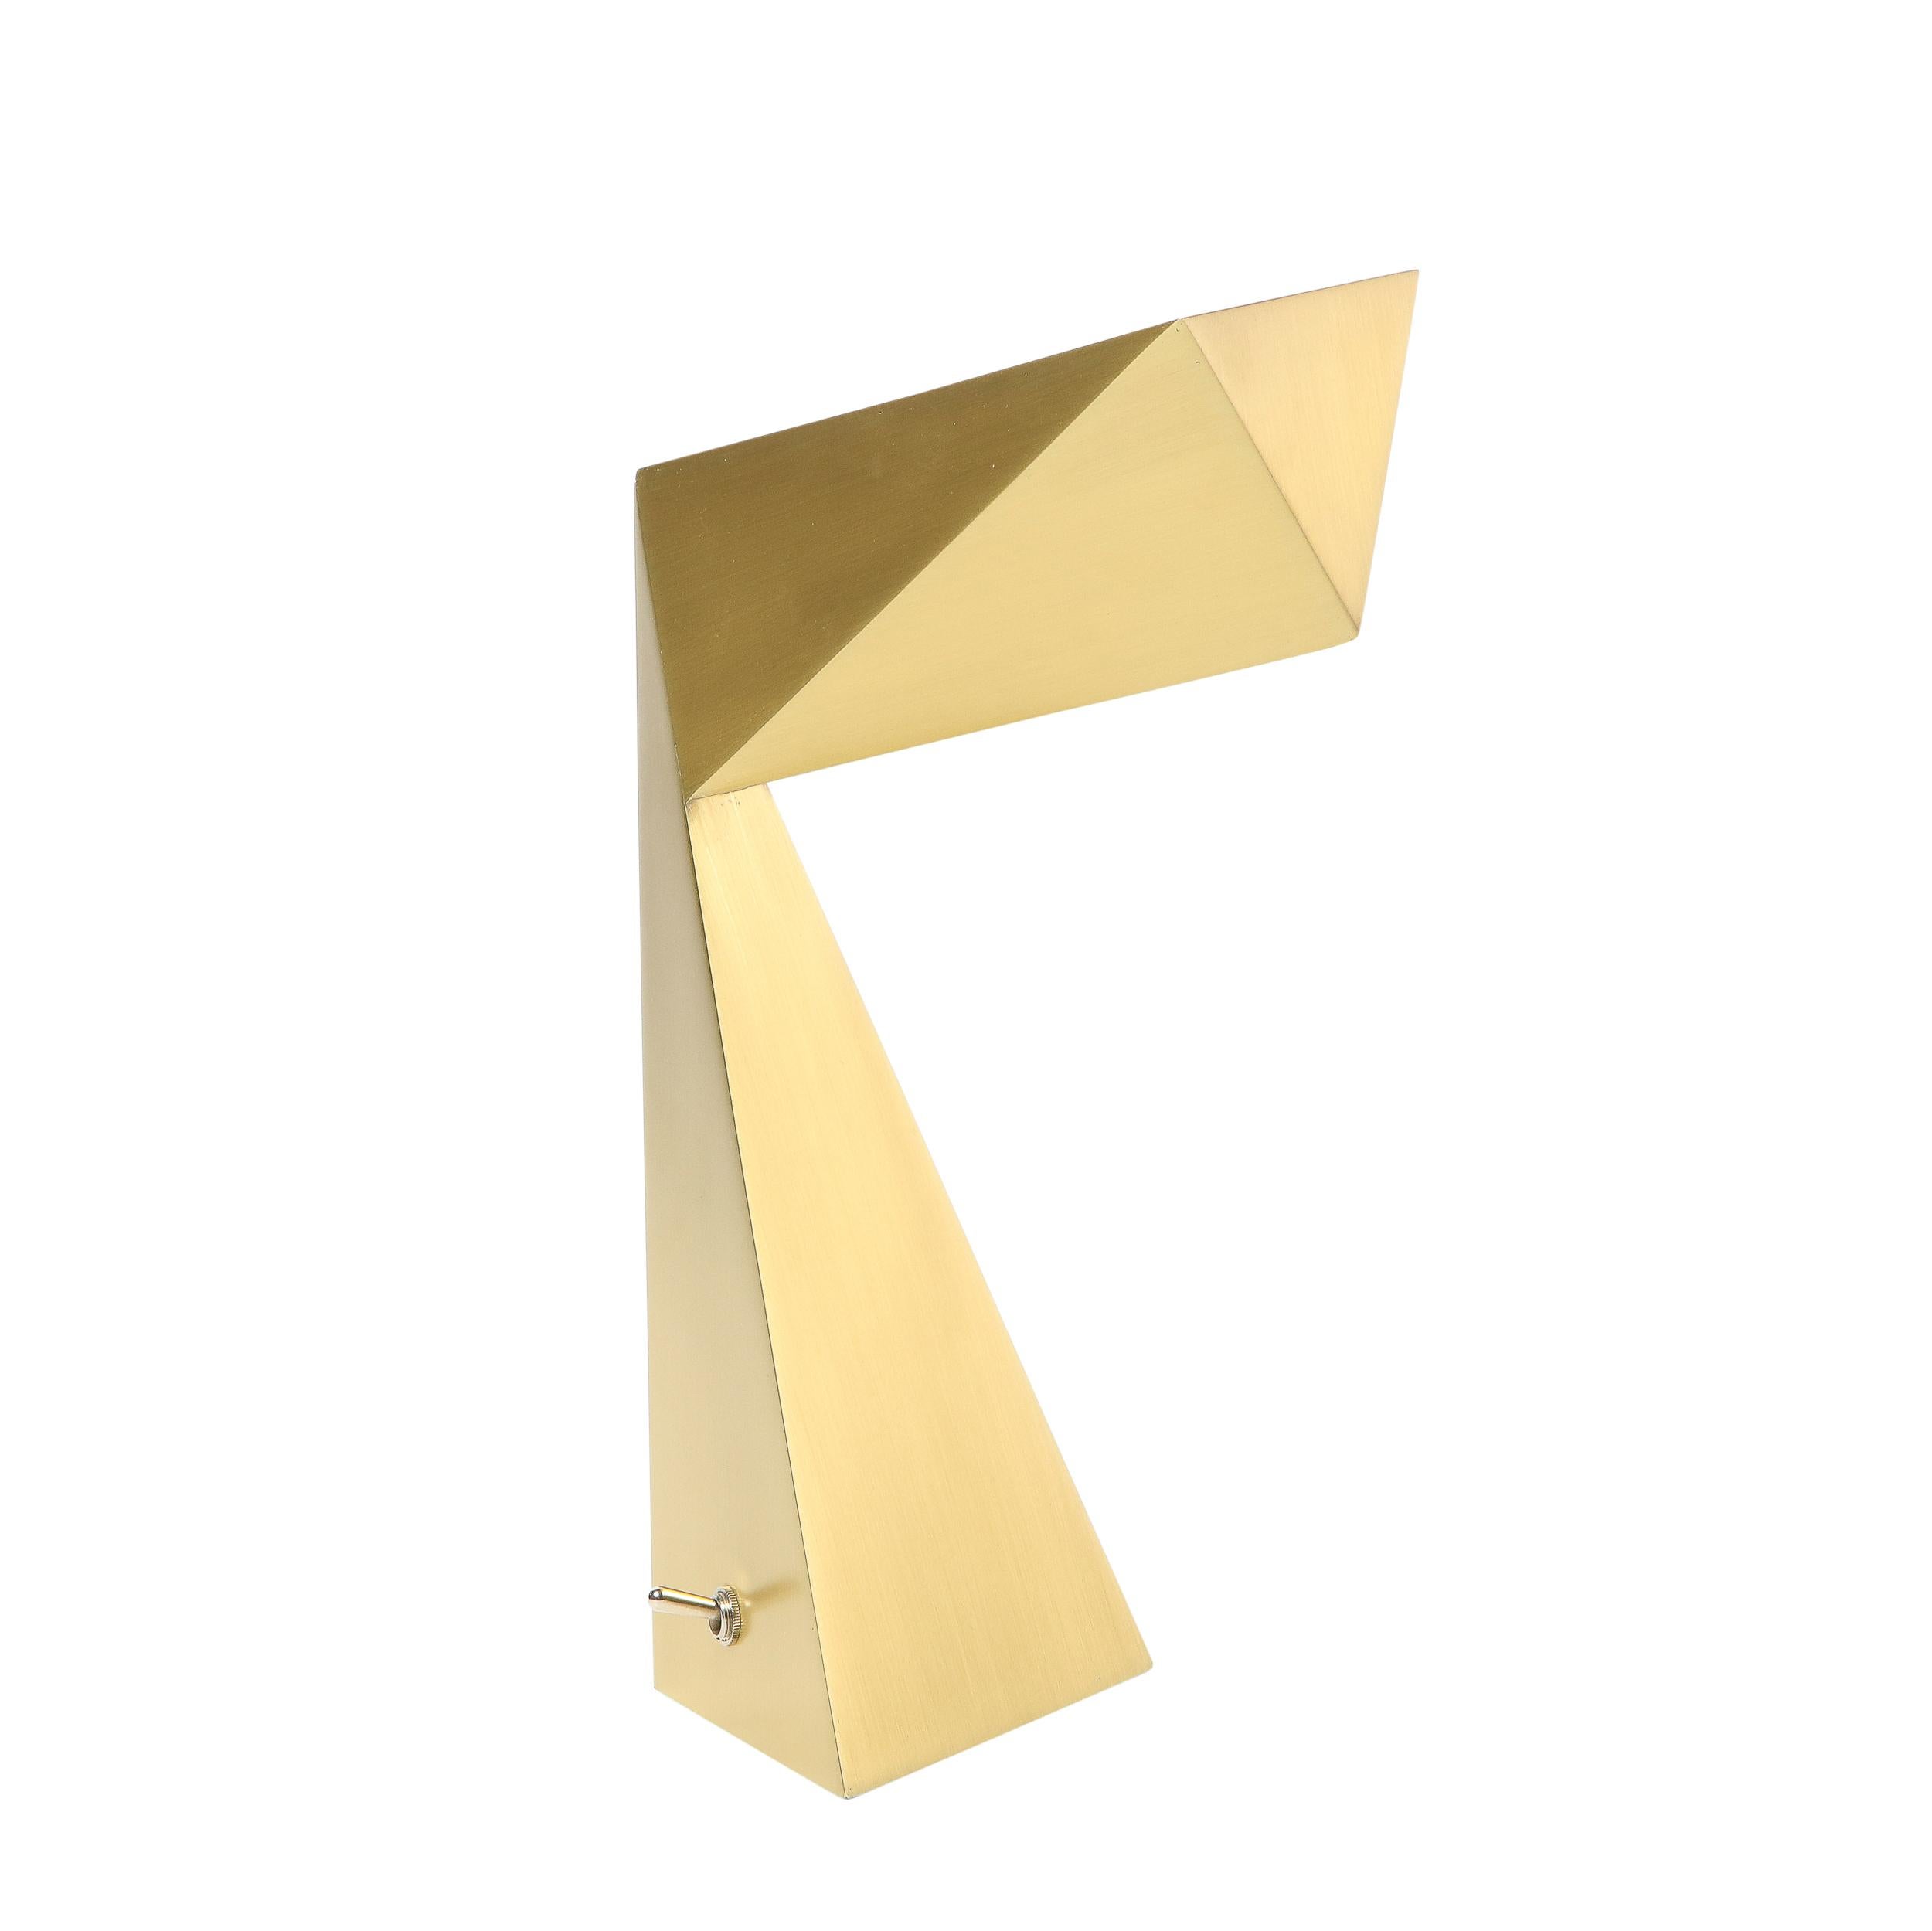 Modernist Brushed Brass Faceted Futurist Origami Lamp by Pouenat 1